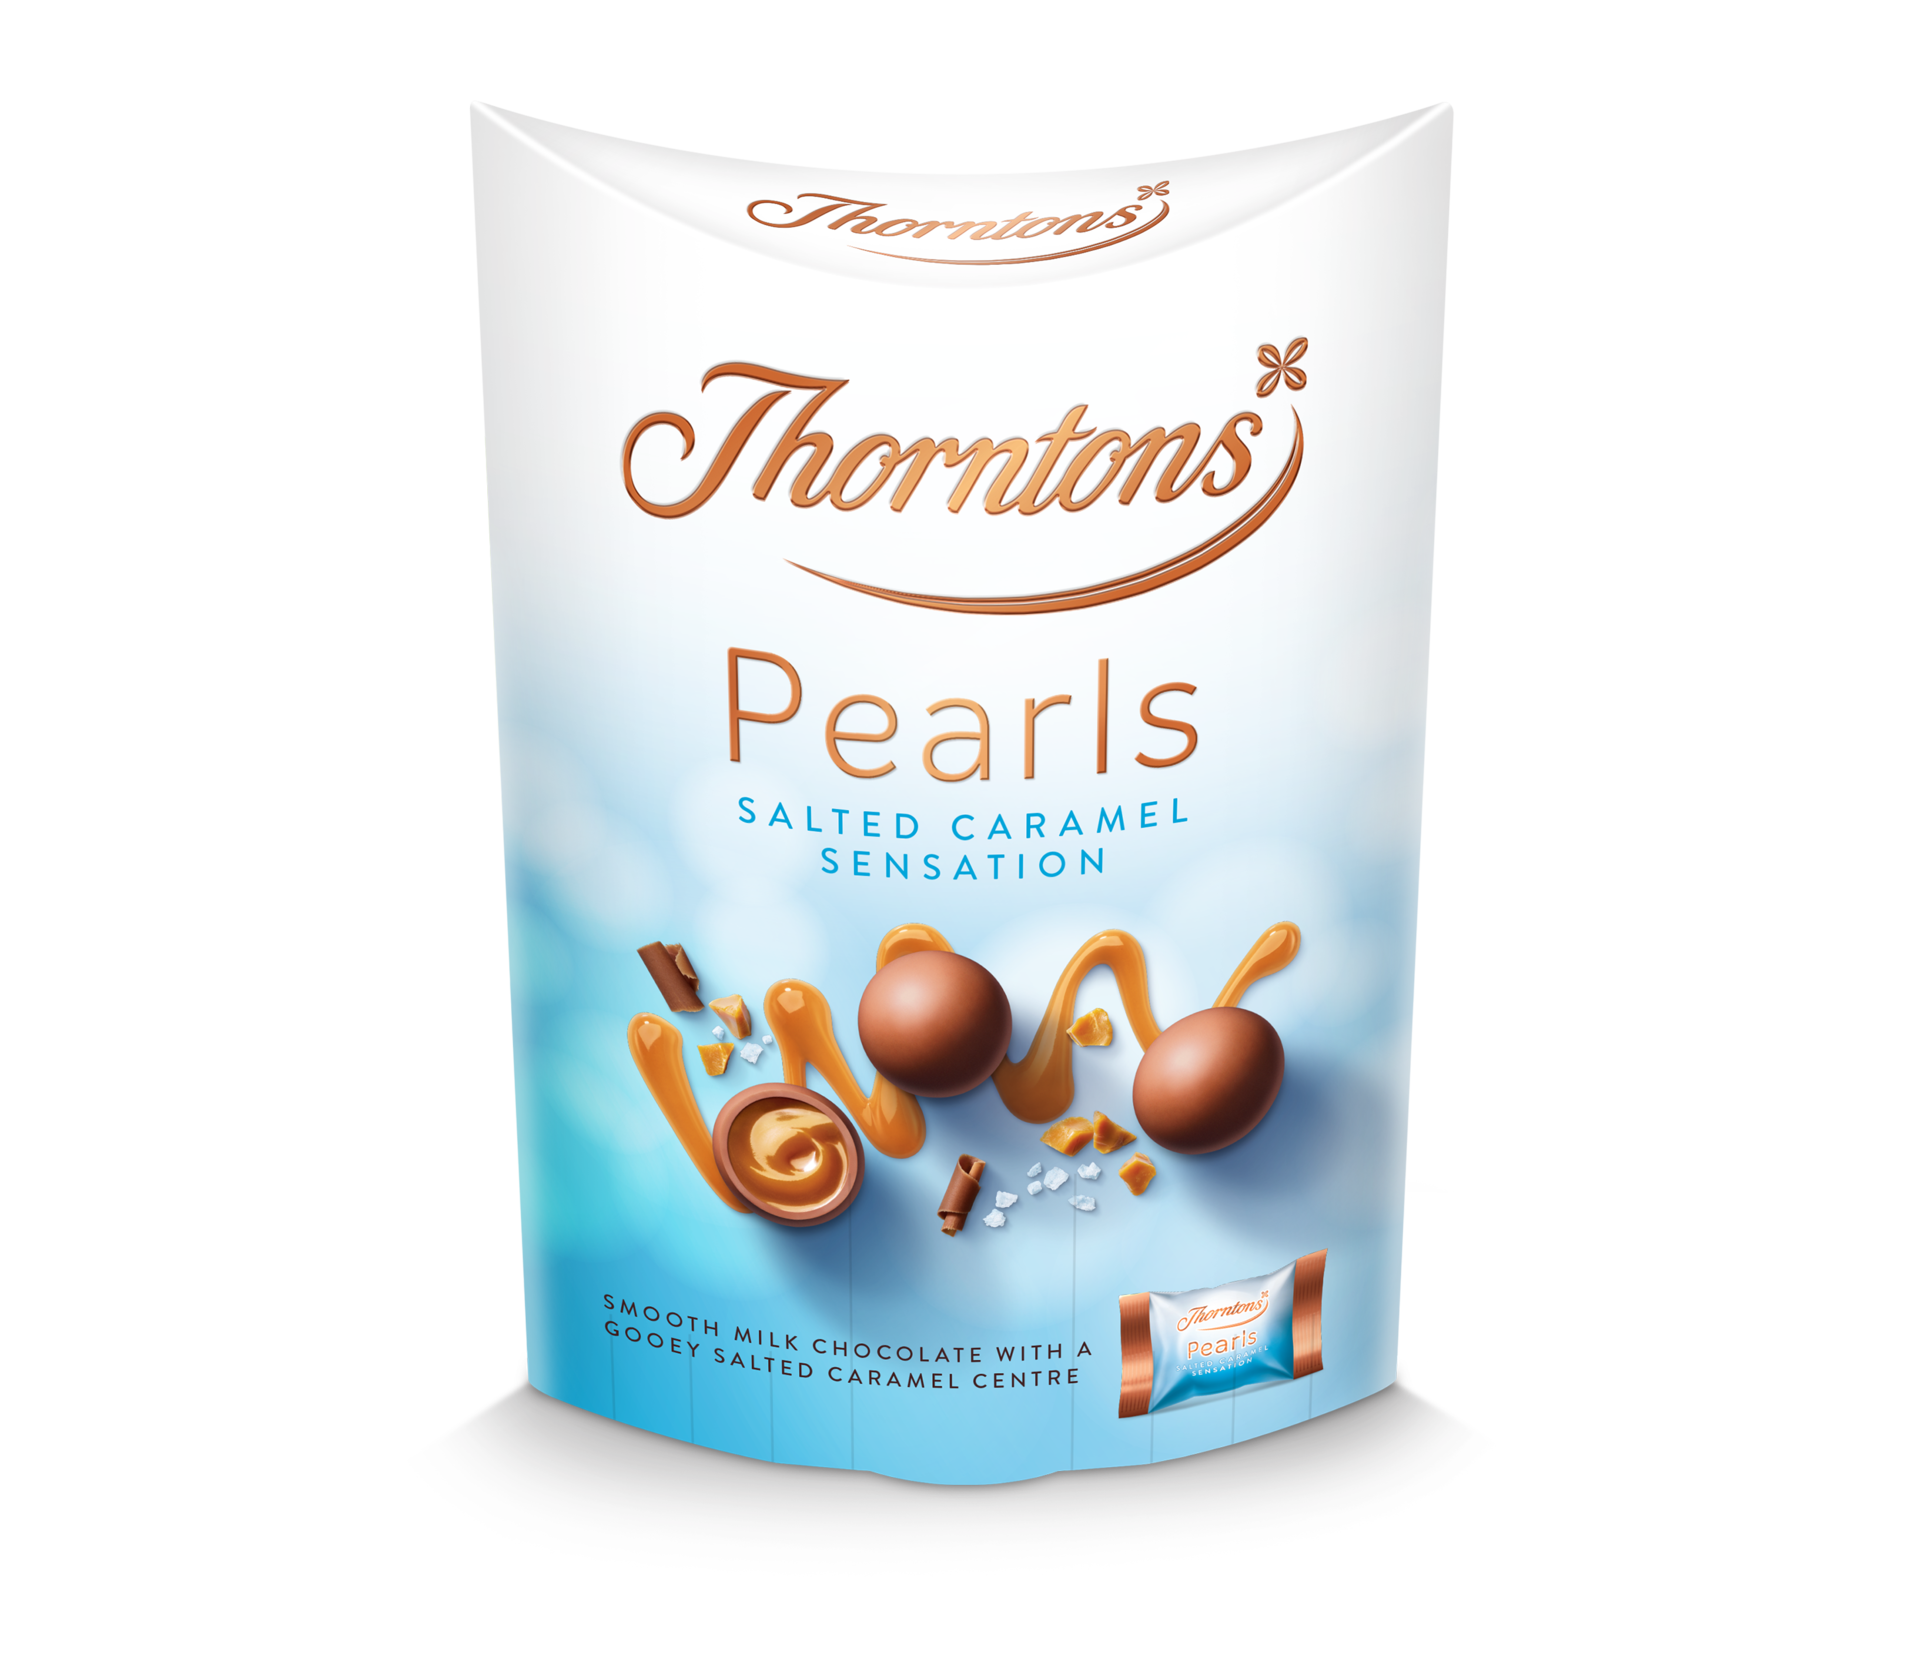 https://www.thorntons.com/medias/sys_master/images/haf/h73/8903680851998/77226875_main/77226875-main.png?resize=ProductGridComponent